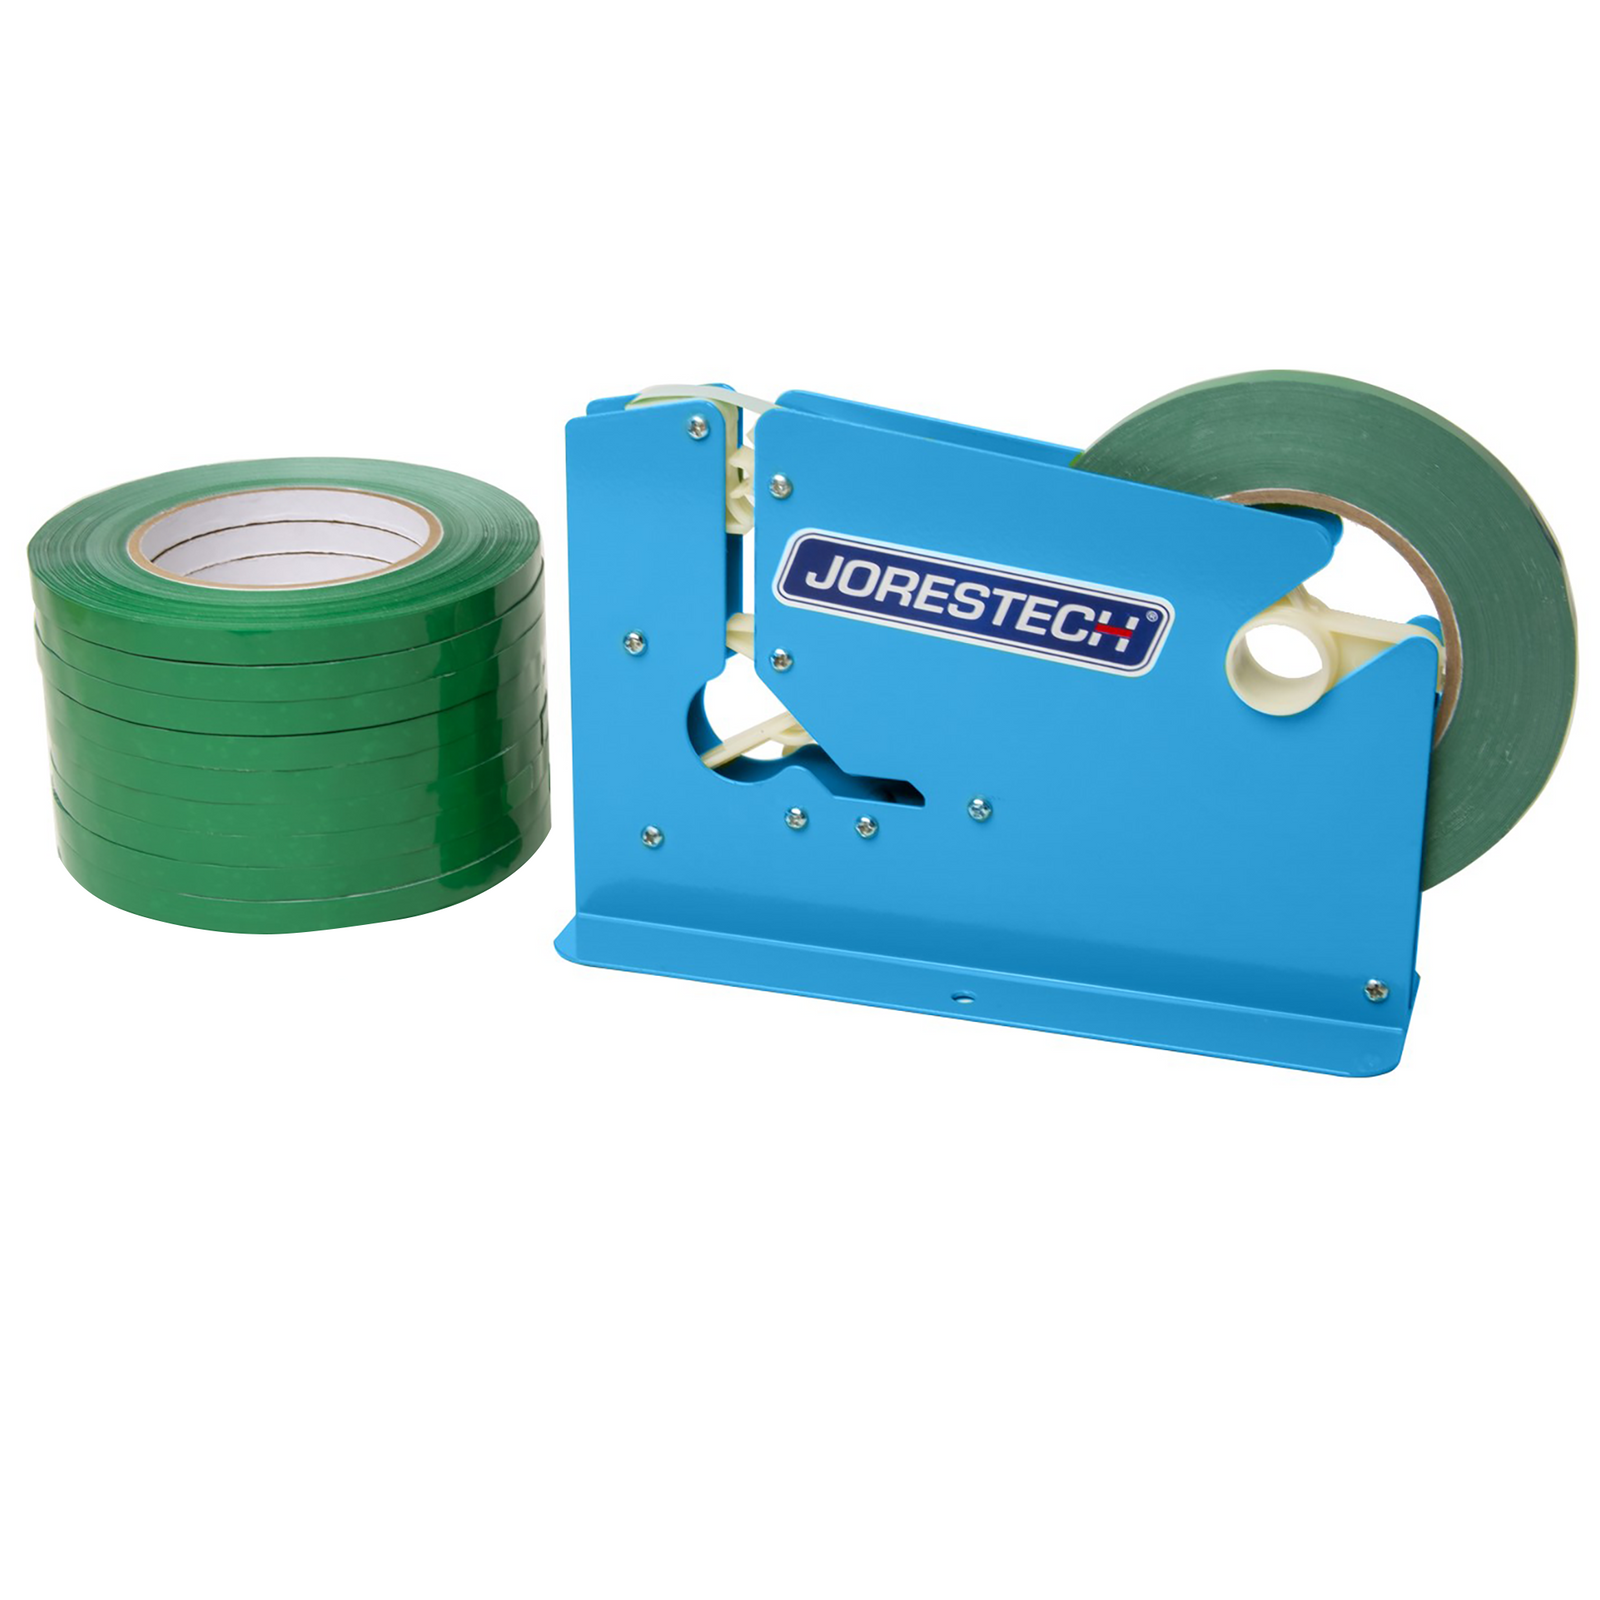 A JORESTECH powder coated blue manual bag taper with 10 green self adhesive tape rolls